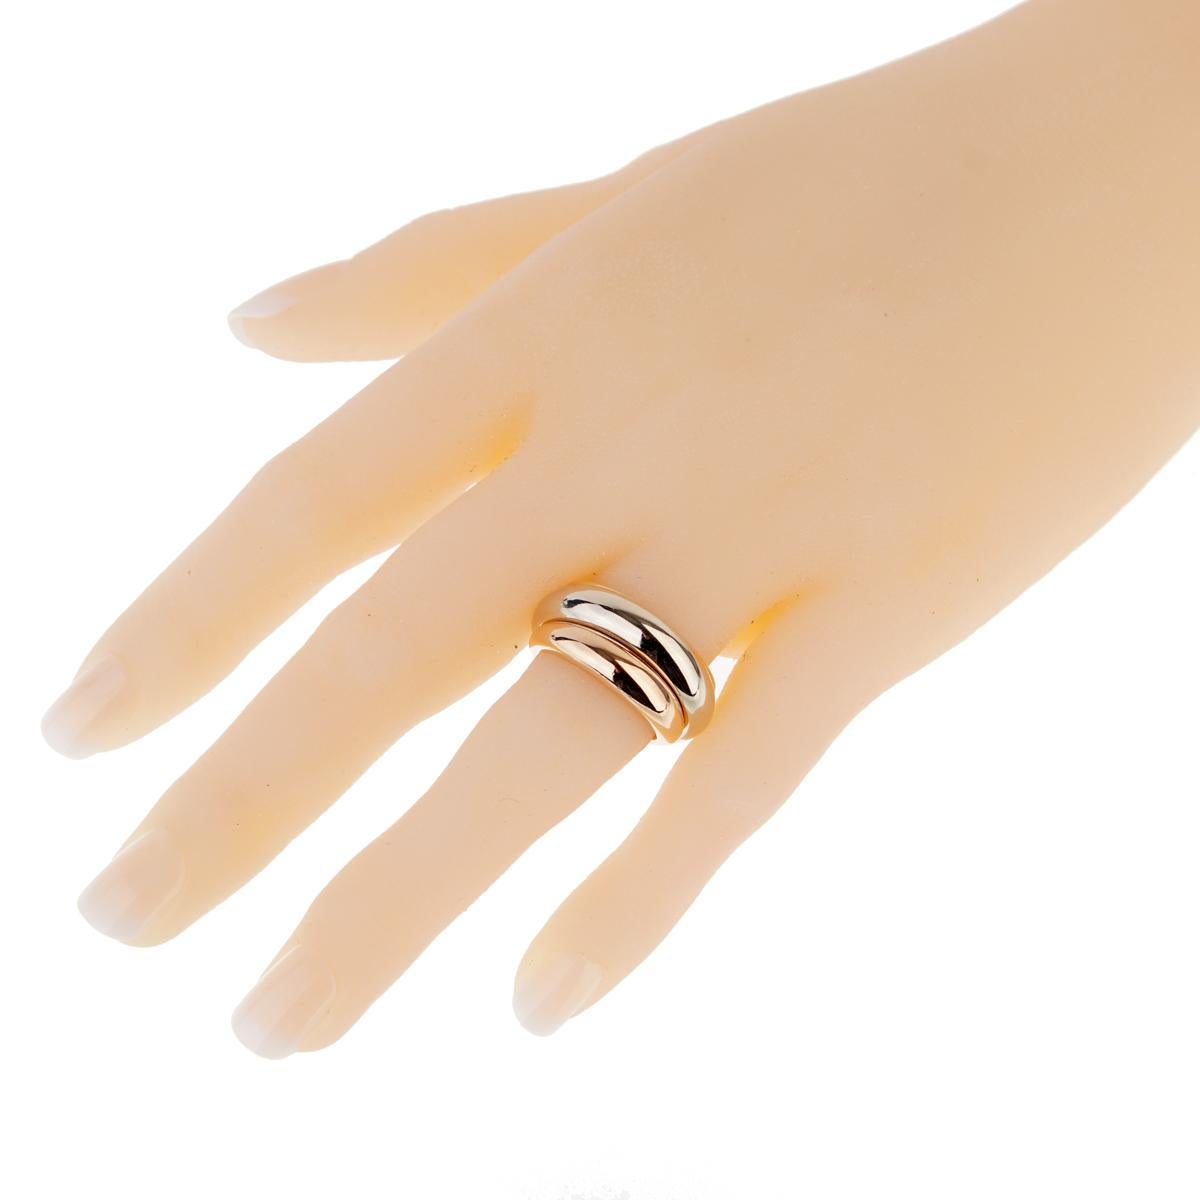 This stunning Cartier Trinity vintage ring features Cartier tricolor 18k yellow rose gold and white gold, gracefully and seamlessly curving together around each other on the finger.

Size 5 1/2 / 51 Eu
Width: .39